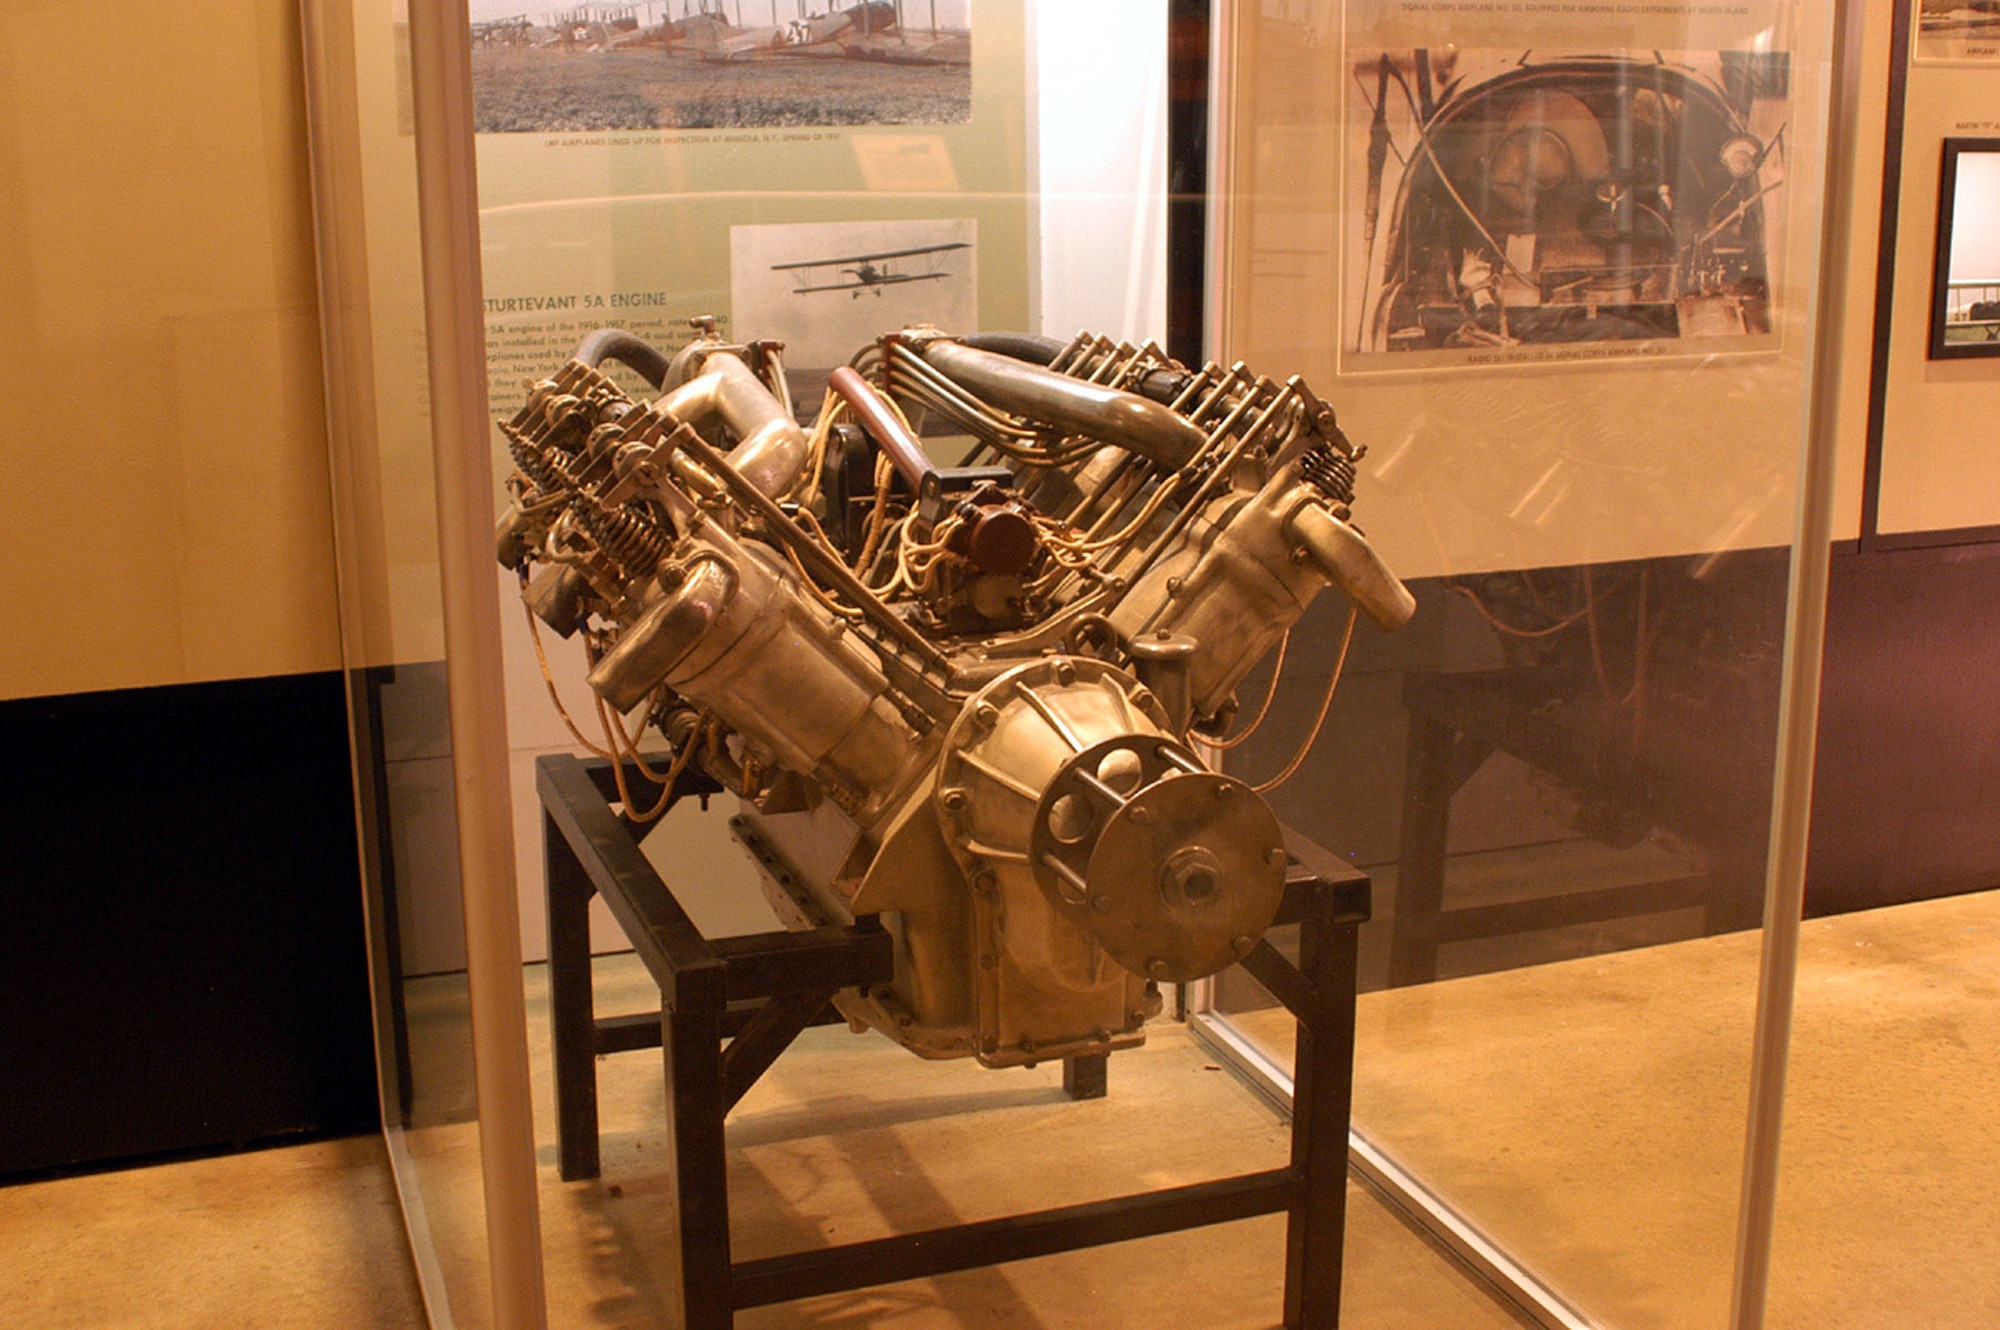 DAYTON, Ohio -- Sturtevant 5A engine on display in the Early Years Gallery at the National Museum of the United States Air Force. (U.S. Air Force photo)